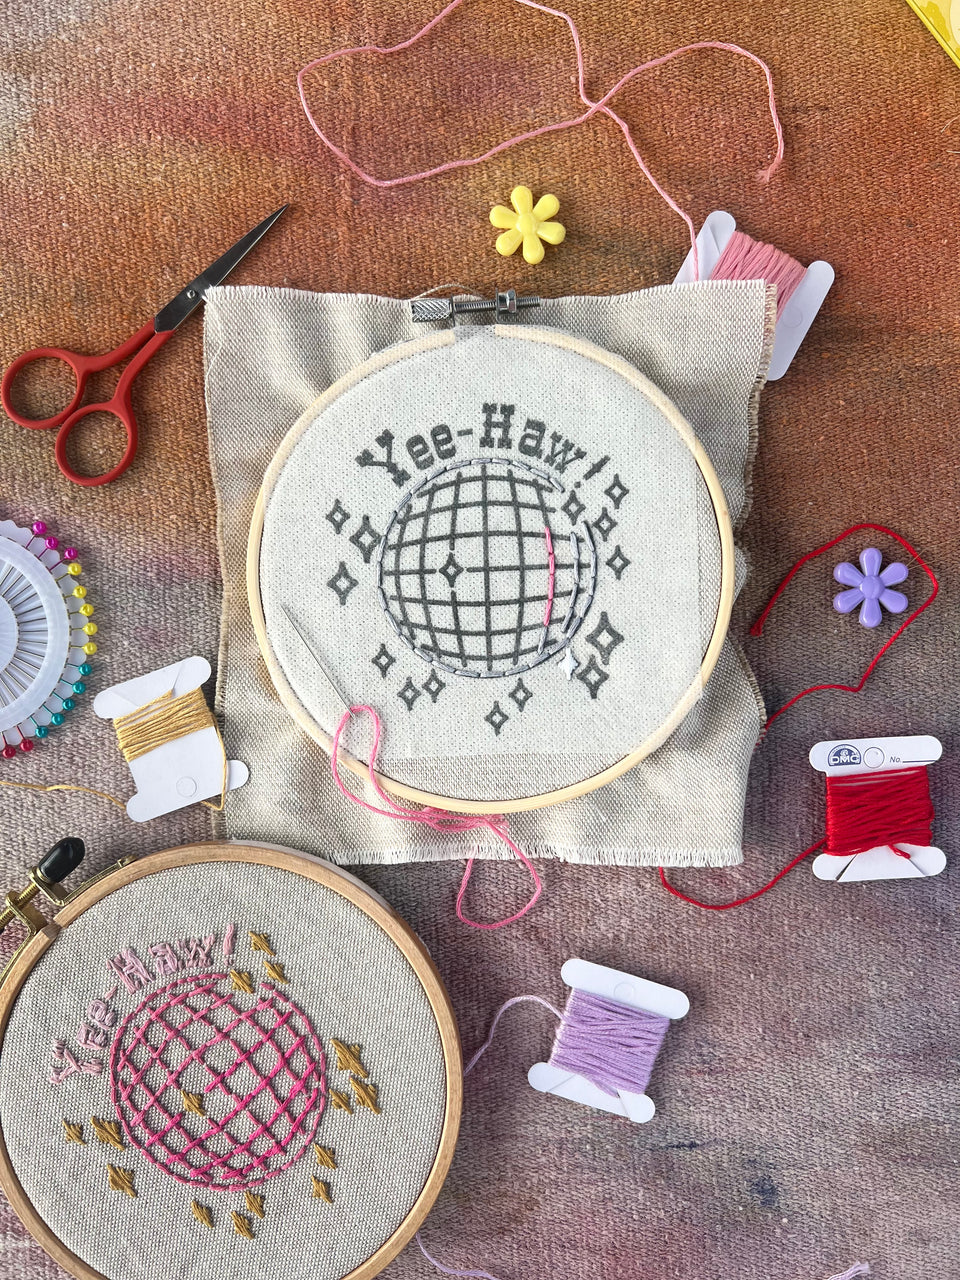 *1 SEAT LEFT* Neon Cowgirl Embroidery Workshop